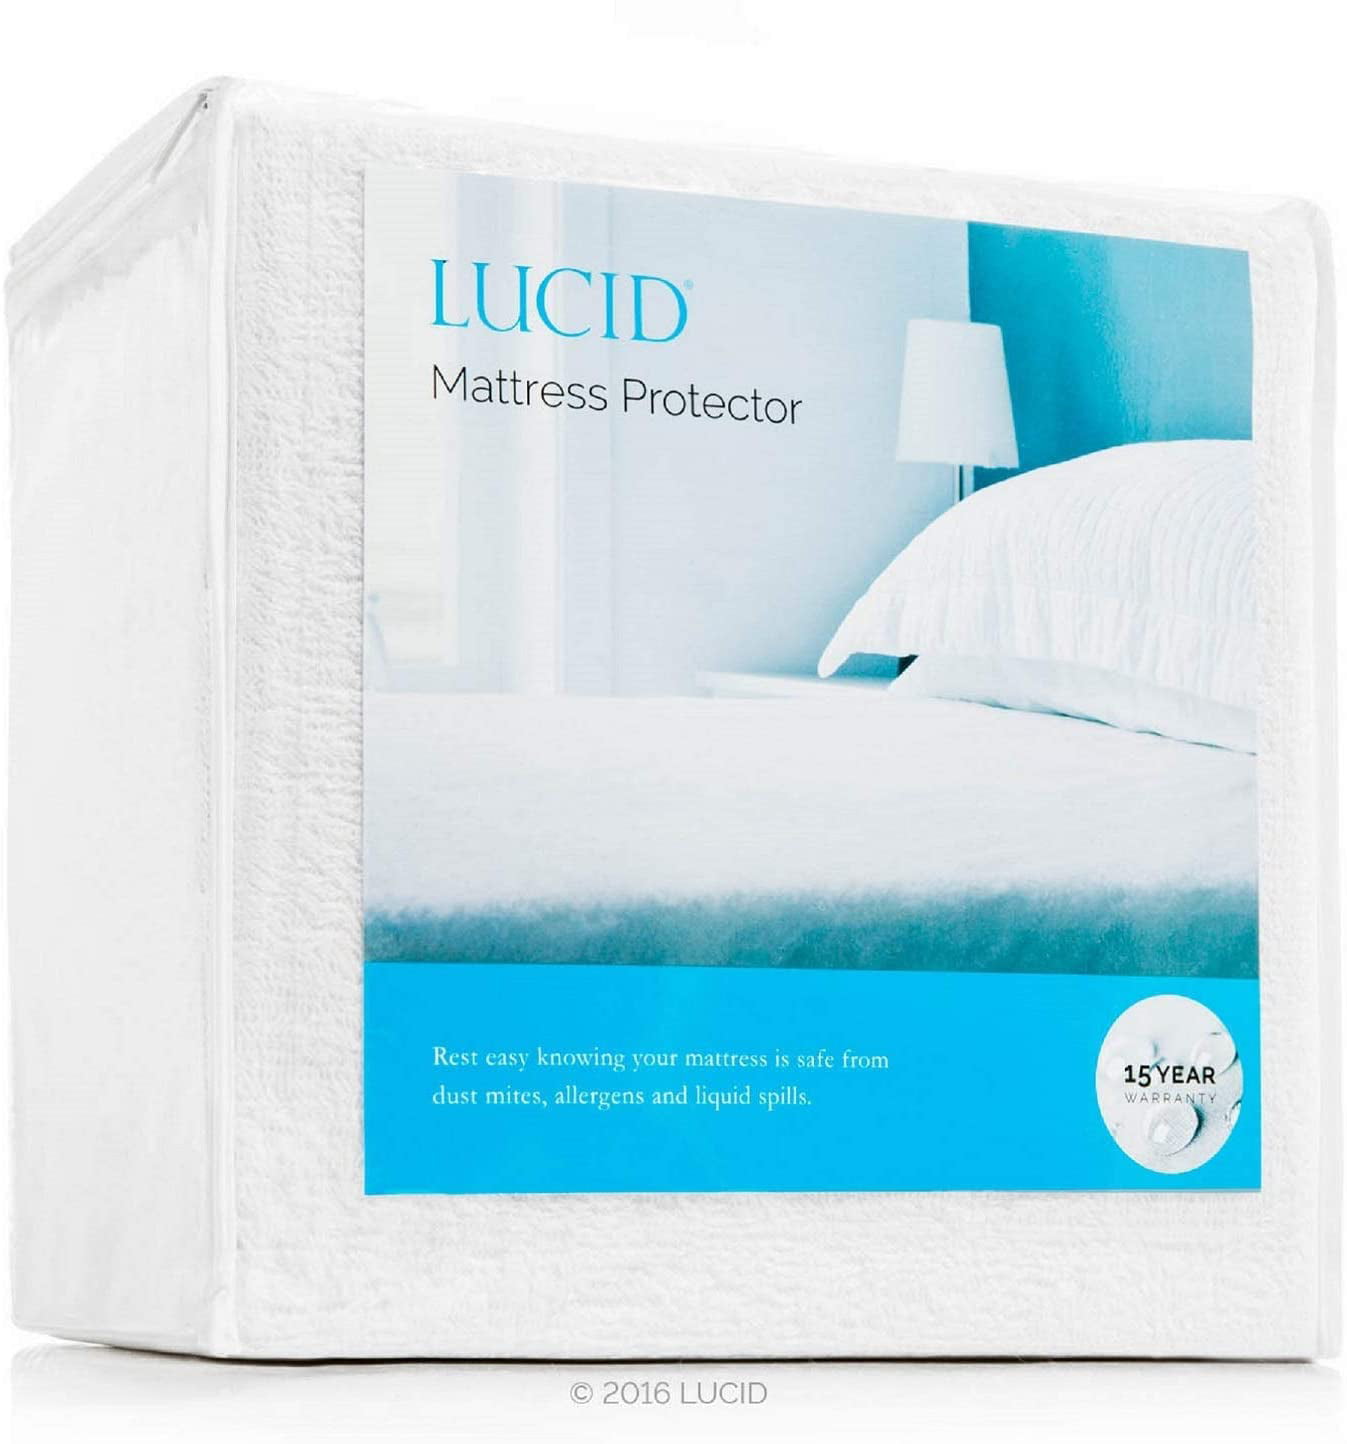 BEDECOR~Cotton Terry 100% Waterproof FULL SIZE Mattress Protector 